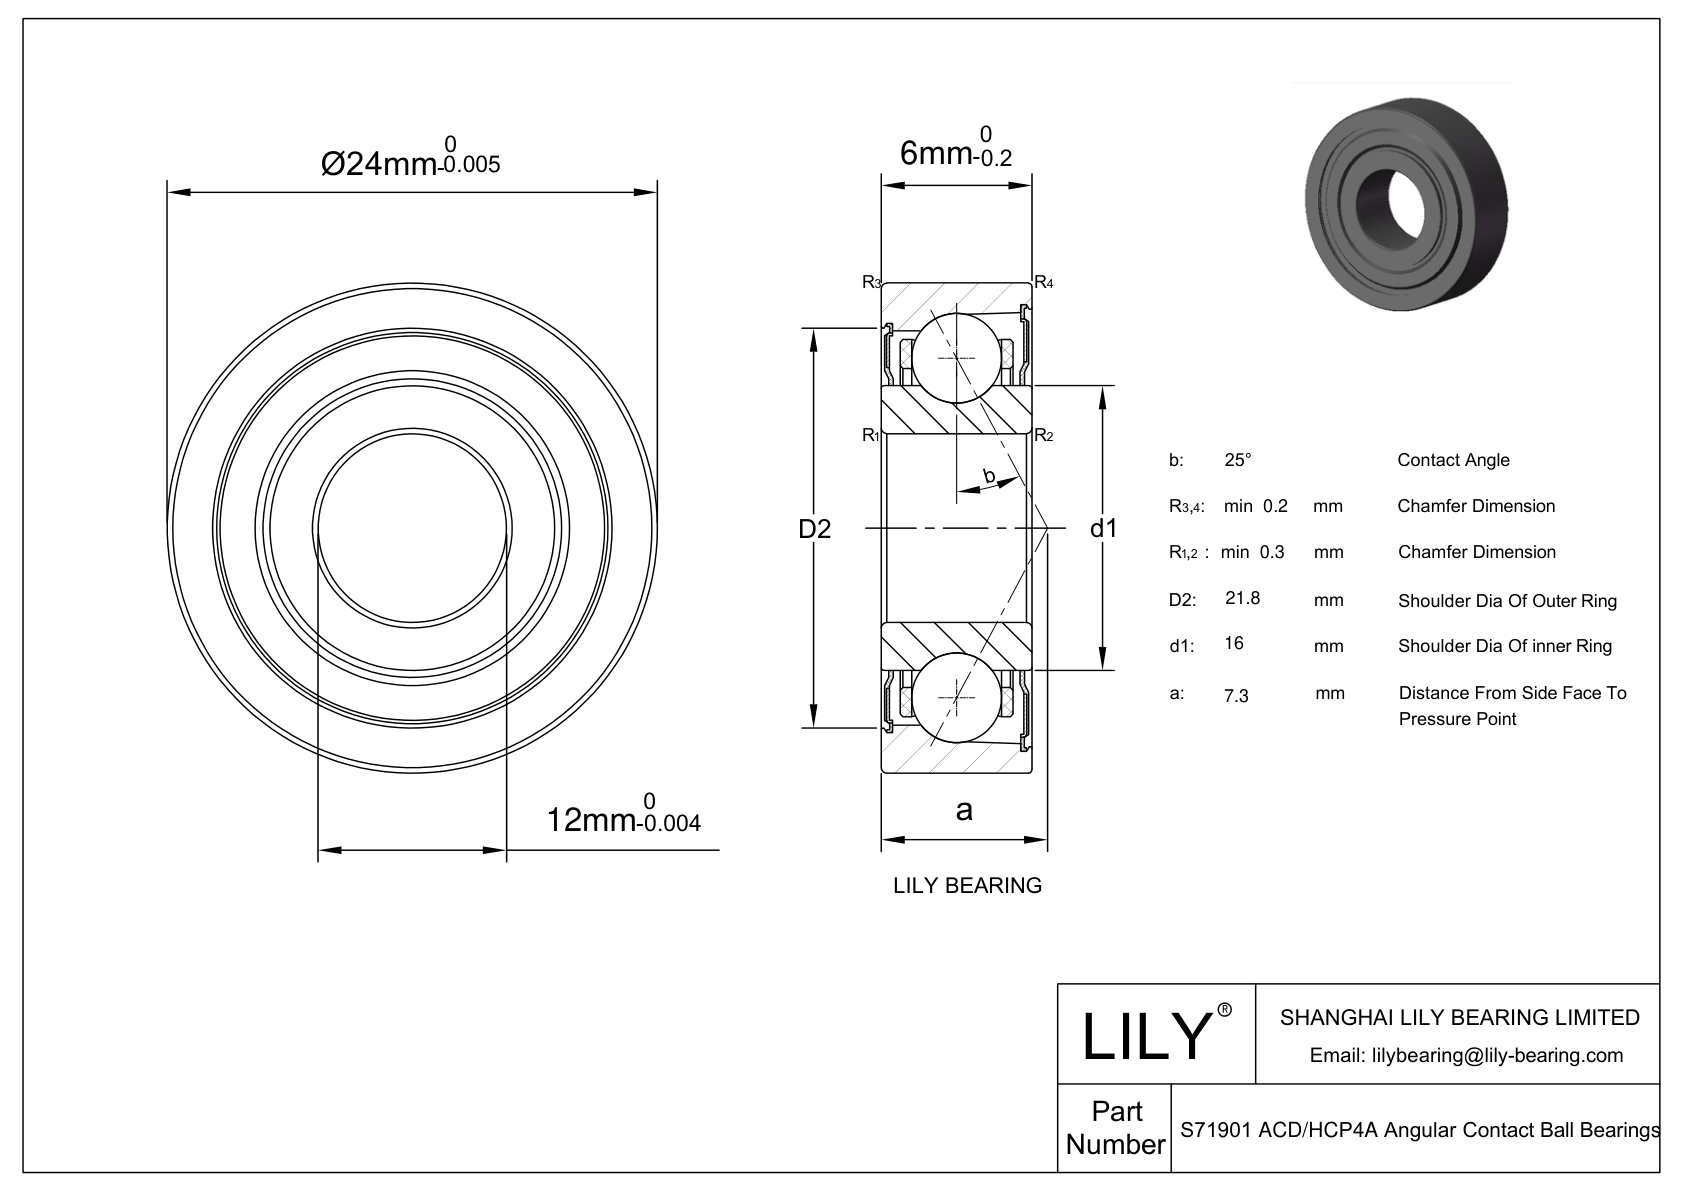 S71901 ACD/HCP4A Super Precision Angular Contact Ball Bearings cad drawing